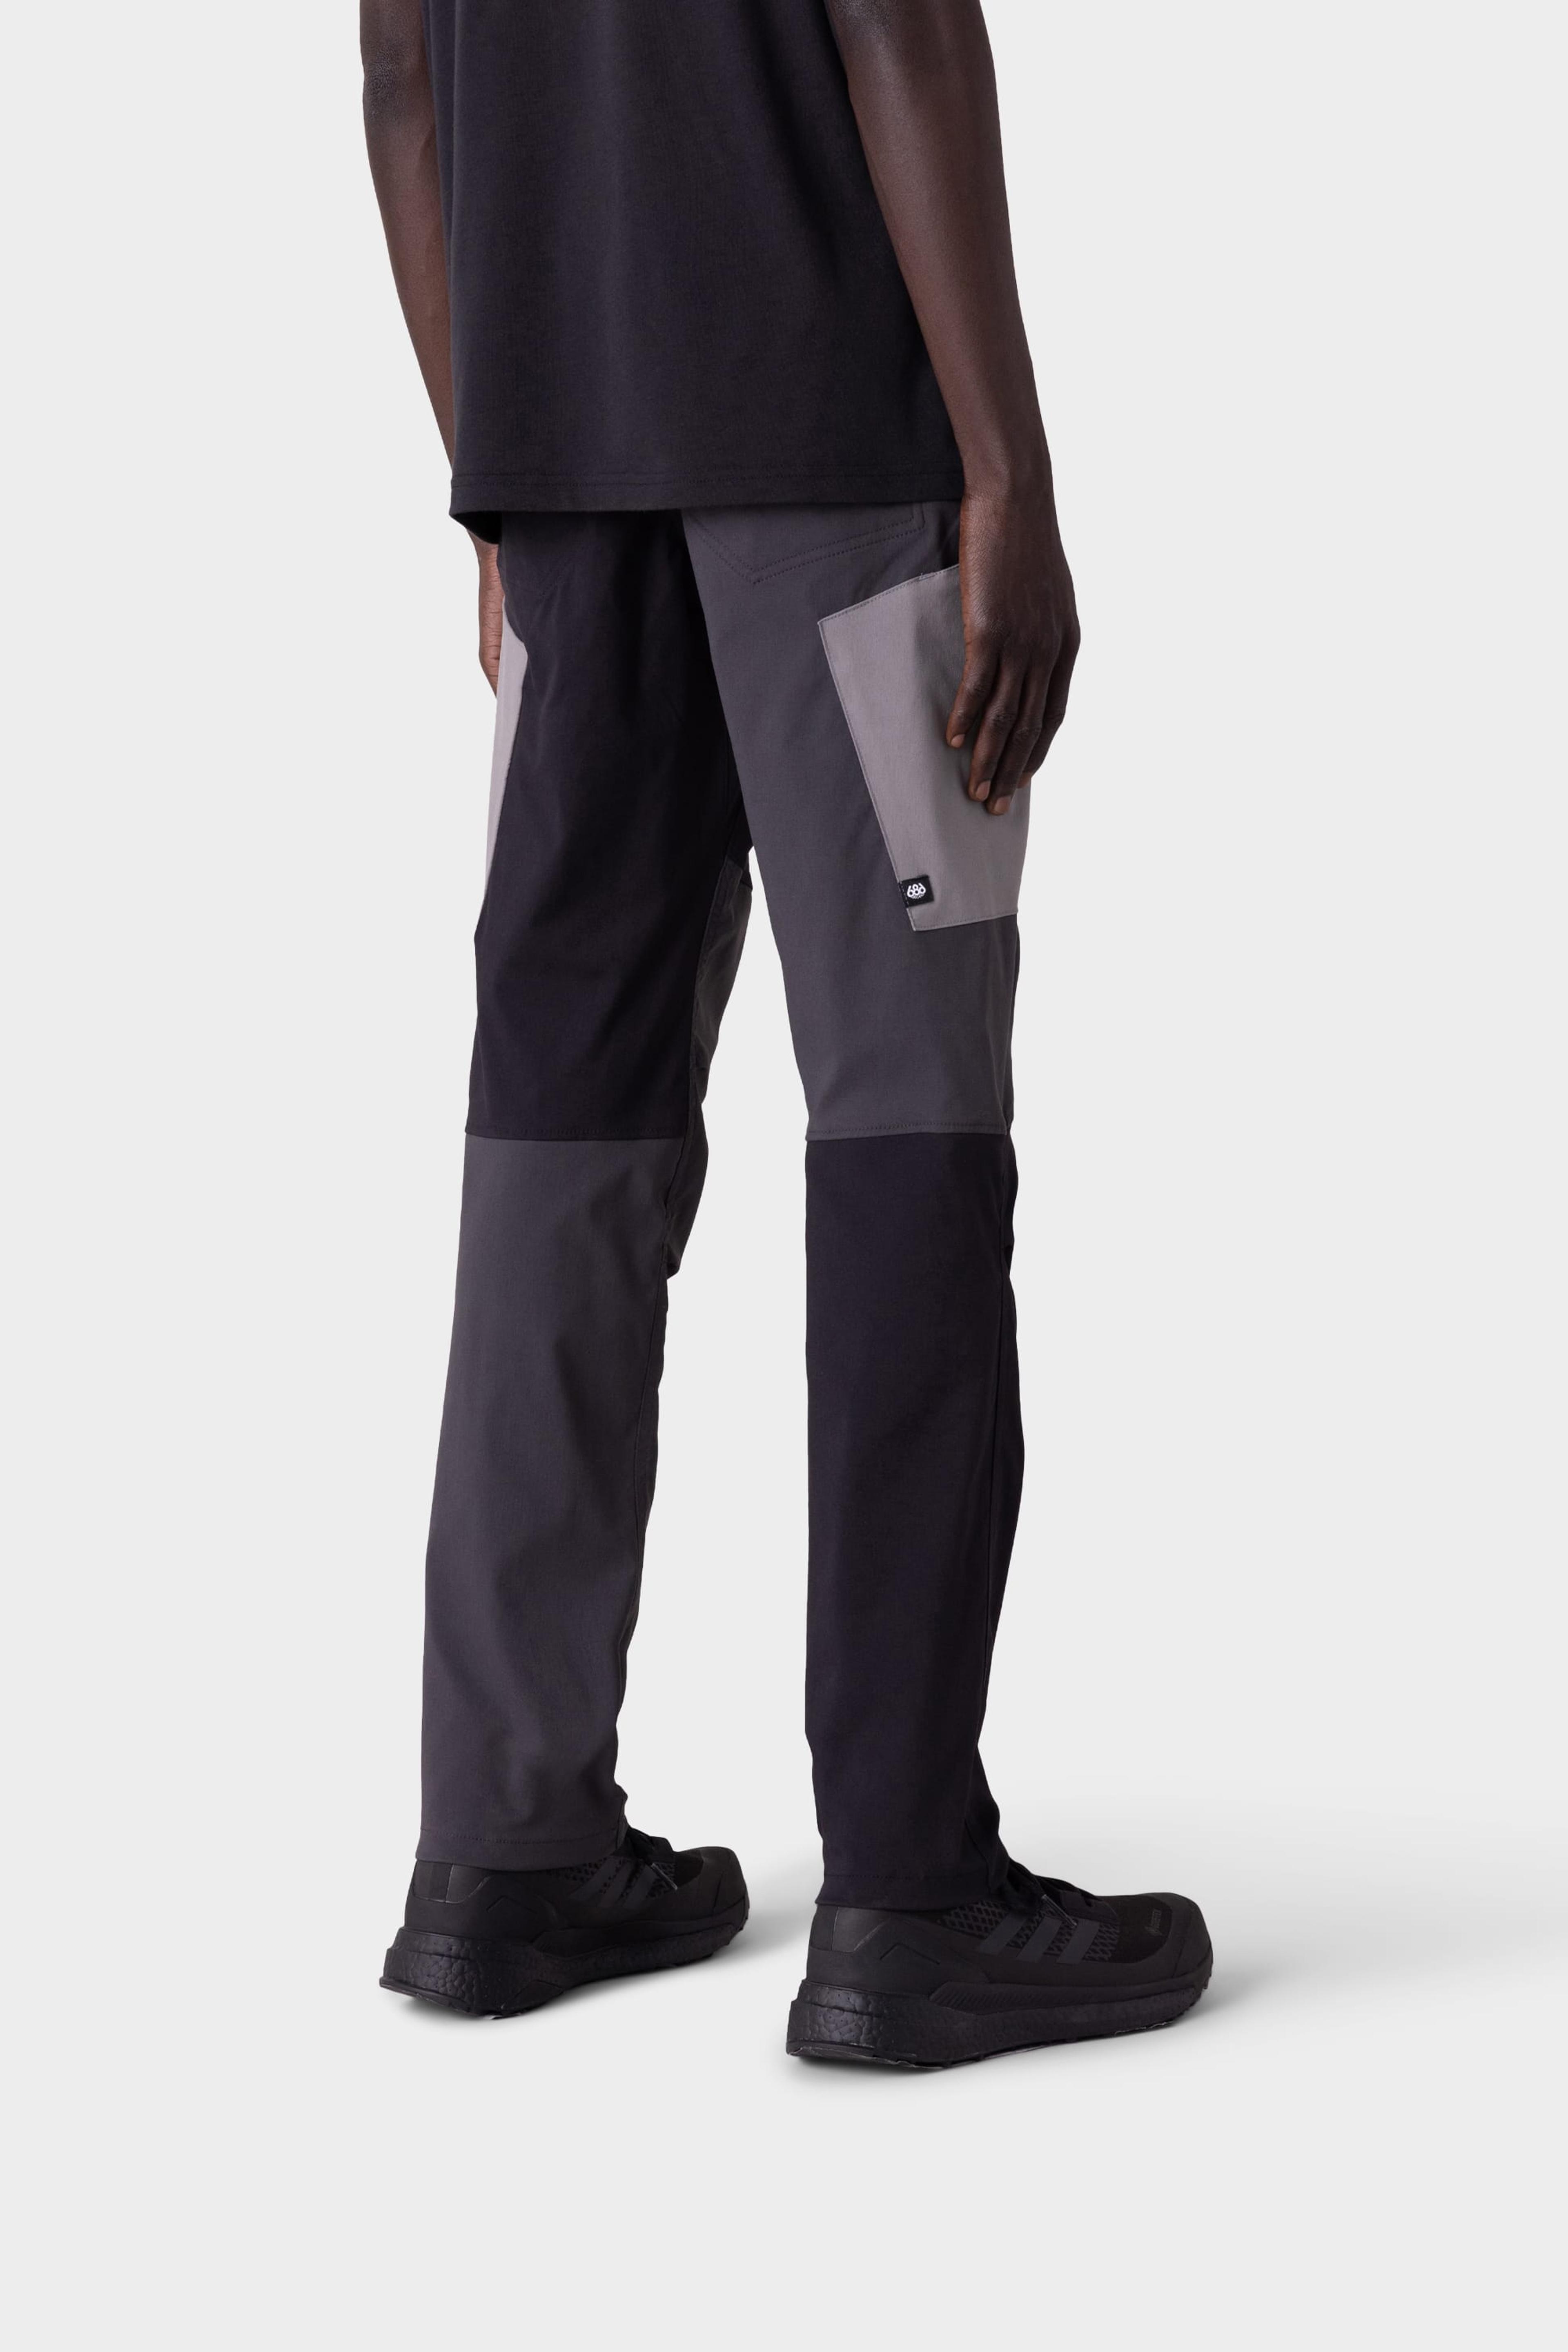 Alternate View 39 of 686 Men's Anything Cargo Pant - Slim Fit